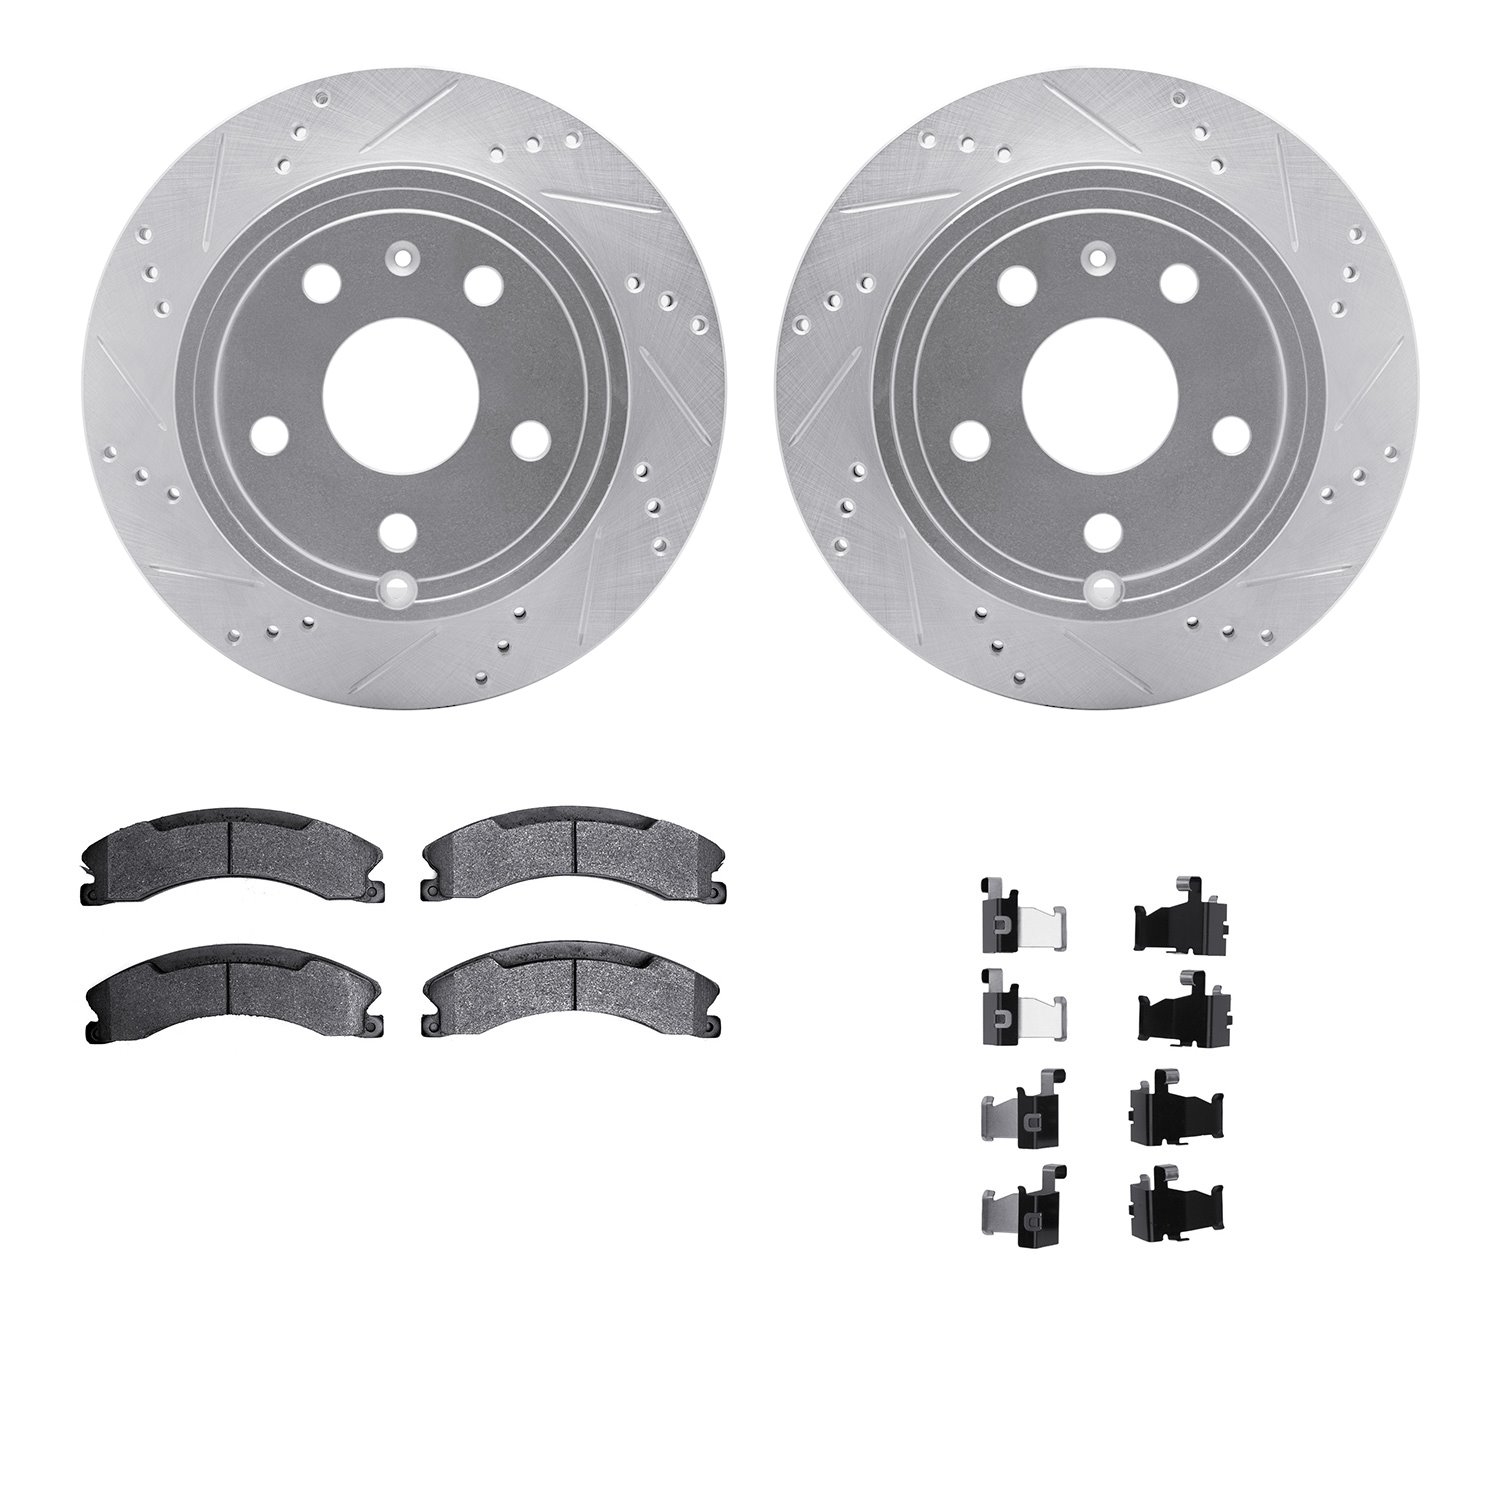 7412-48041 Drilled/Slotted Brake Rotors with Ultimate-Duty Brake Pads Kit & Hardware [Silver], 2009-2020 GM, Position: Rear